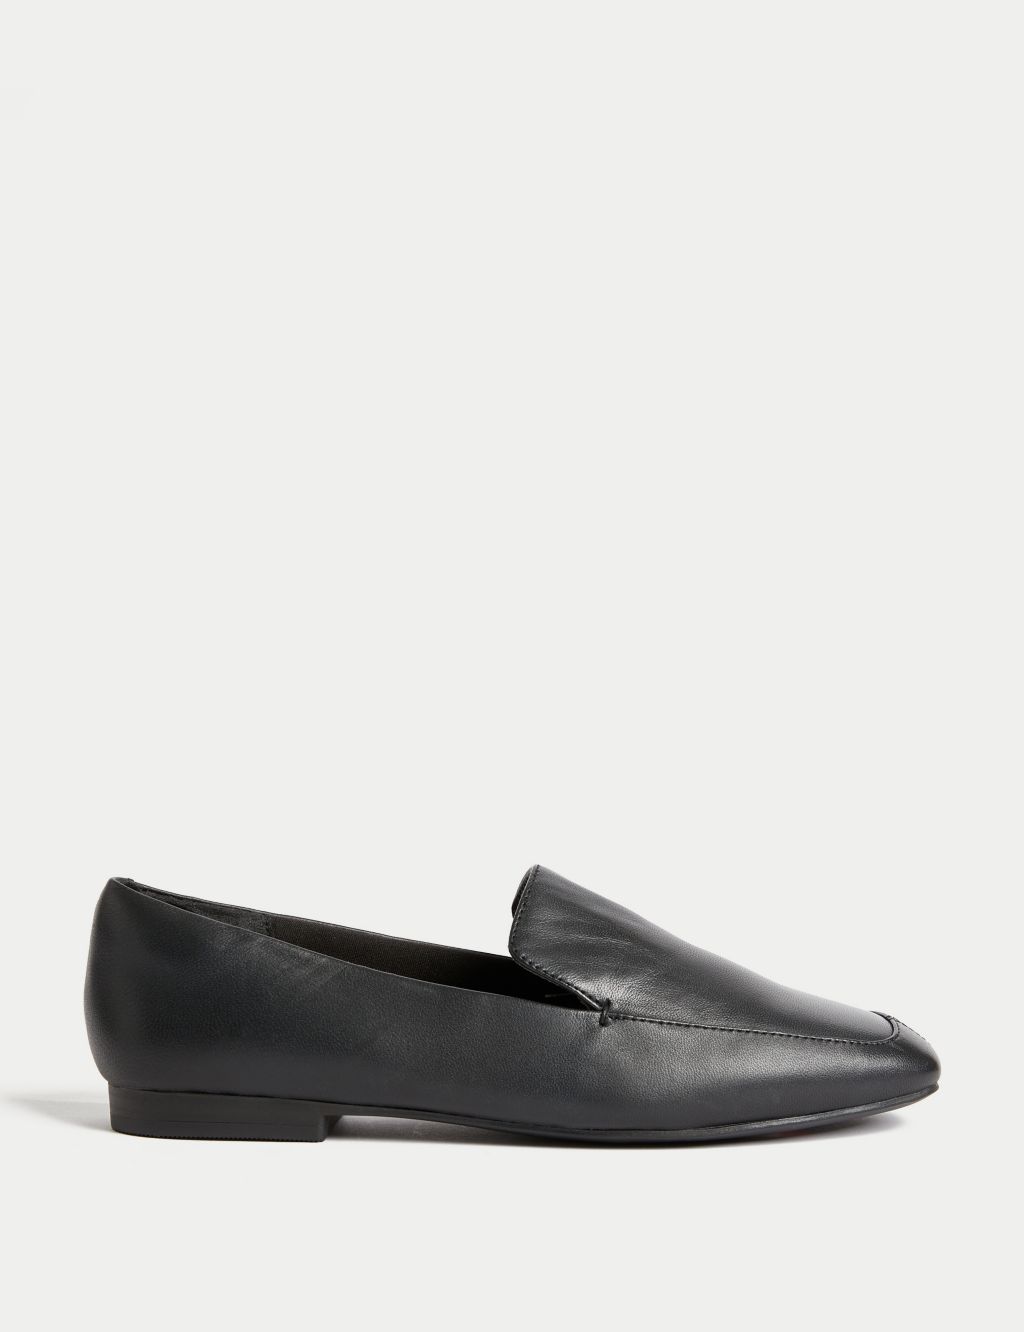 Wide Fit Leather Square Toe Flat Loafers | M&S Collection | M&S